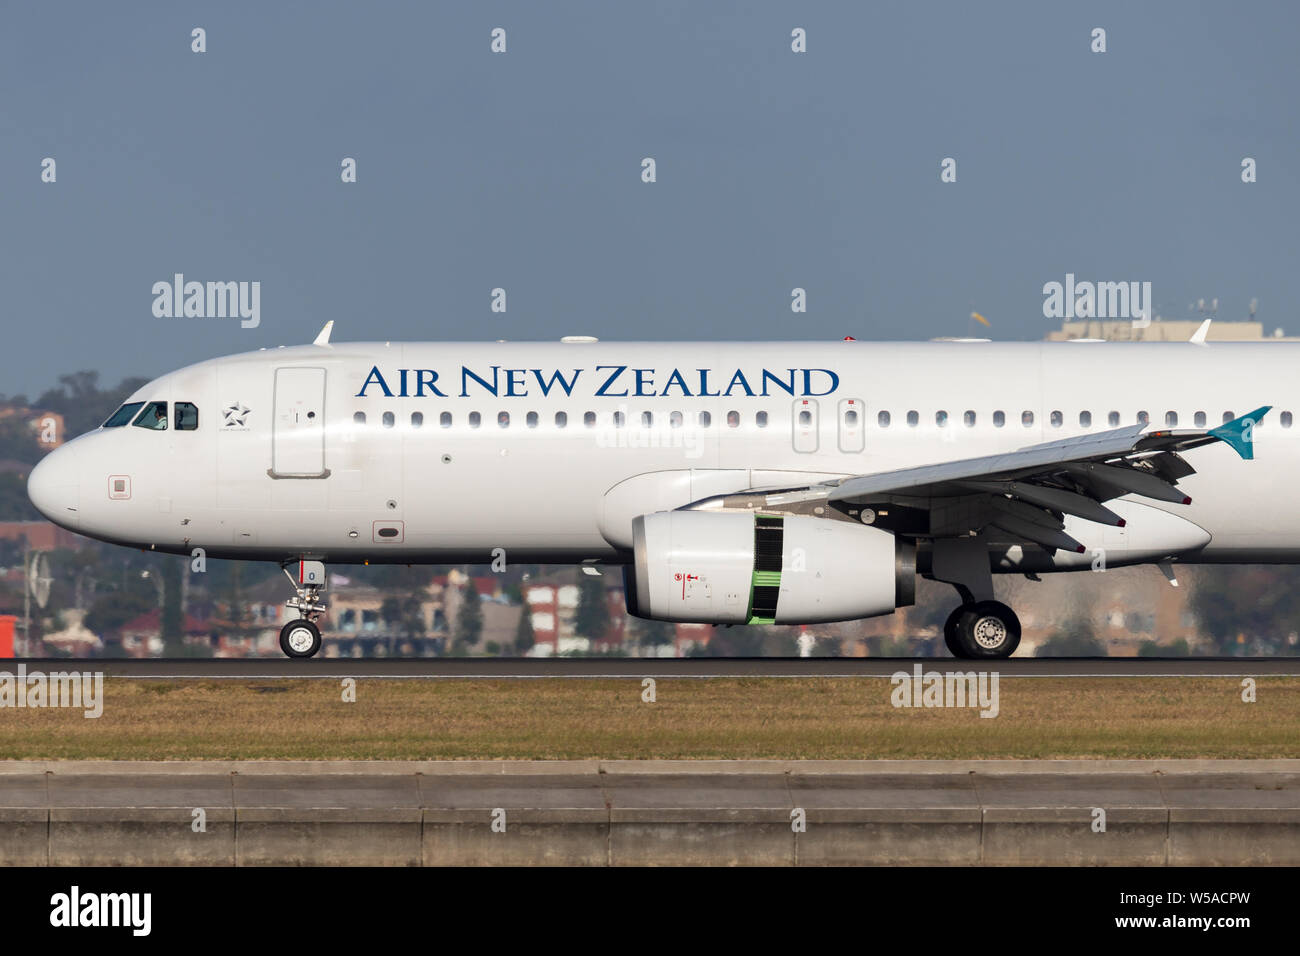 Air New Zealand Airbus A320 twin engined commercial airliner taking off from Sydney Airport. Stock Photo